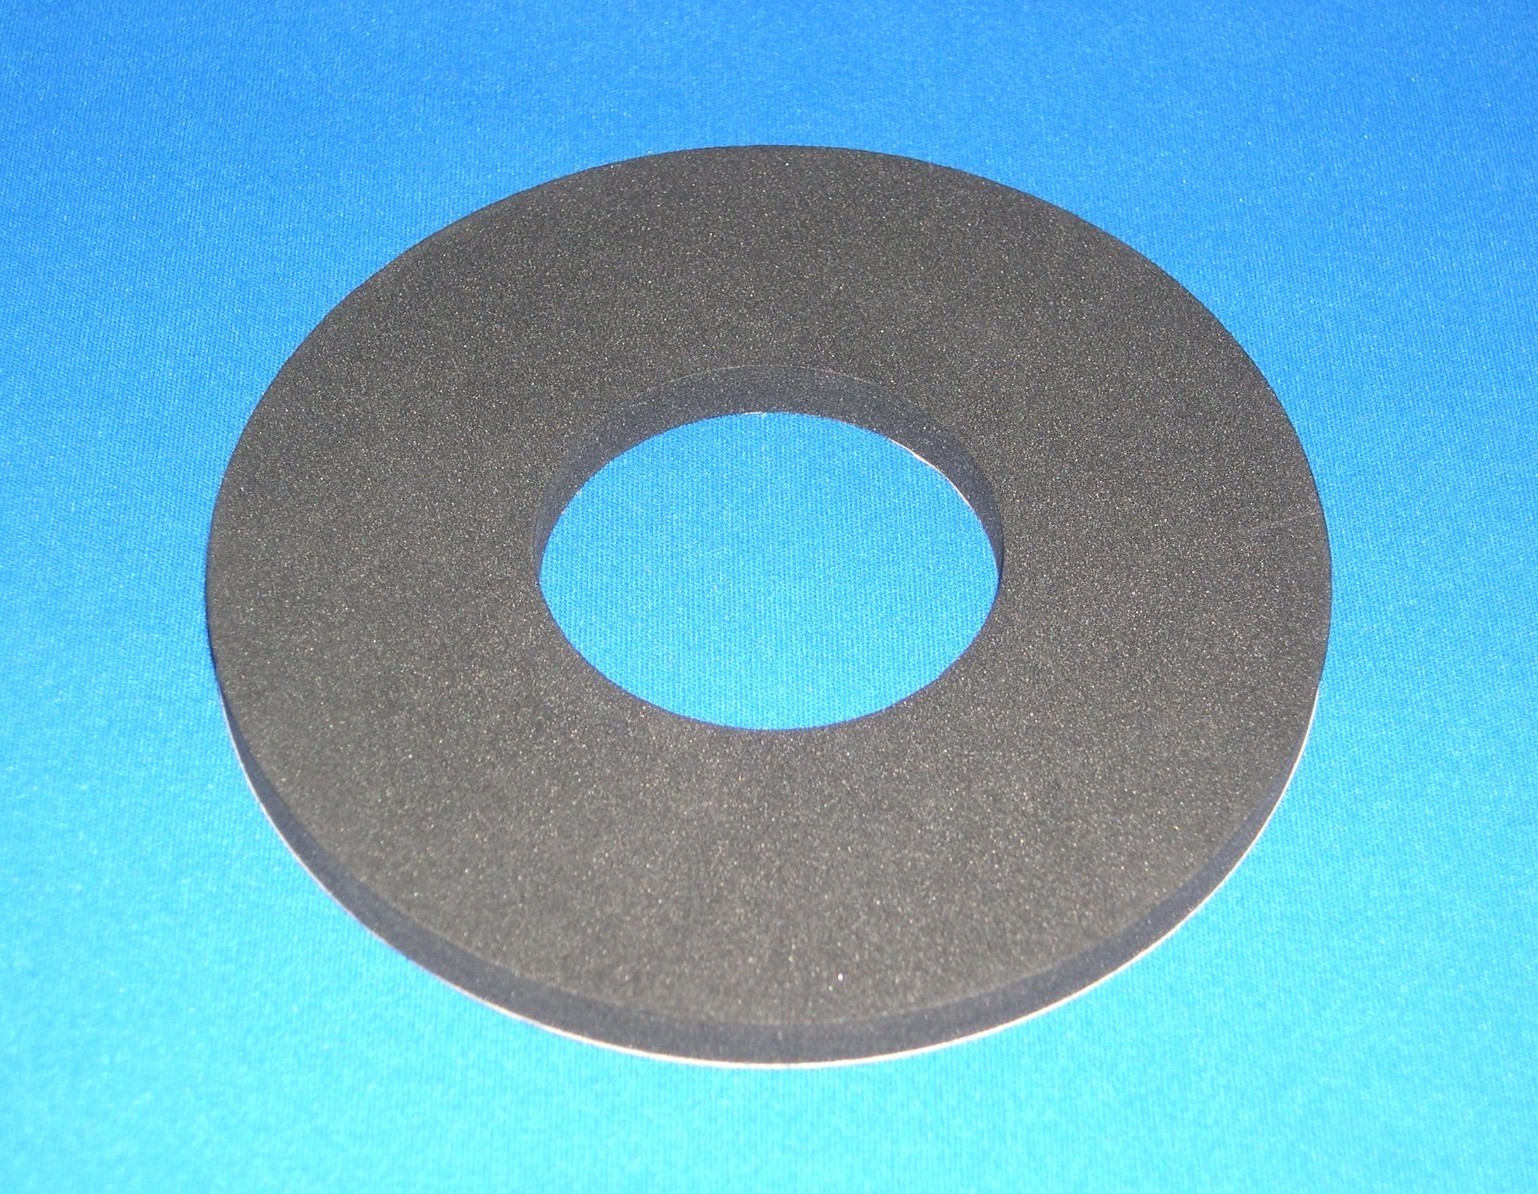 Featured image for “New 5.7″ Vacuum & Central Vac Motor Mounting Cushion Gasket Fits all 5.7″ Motors”